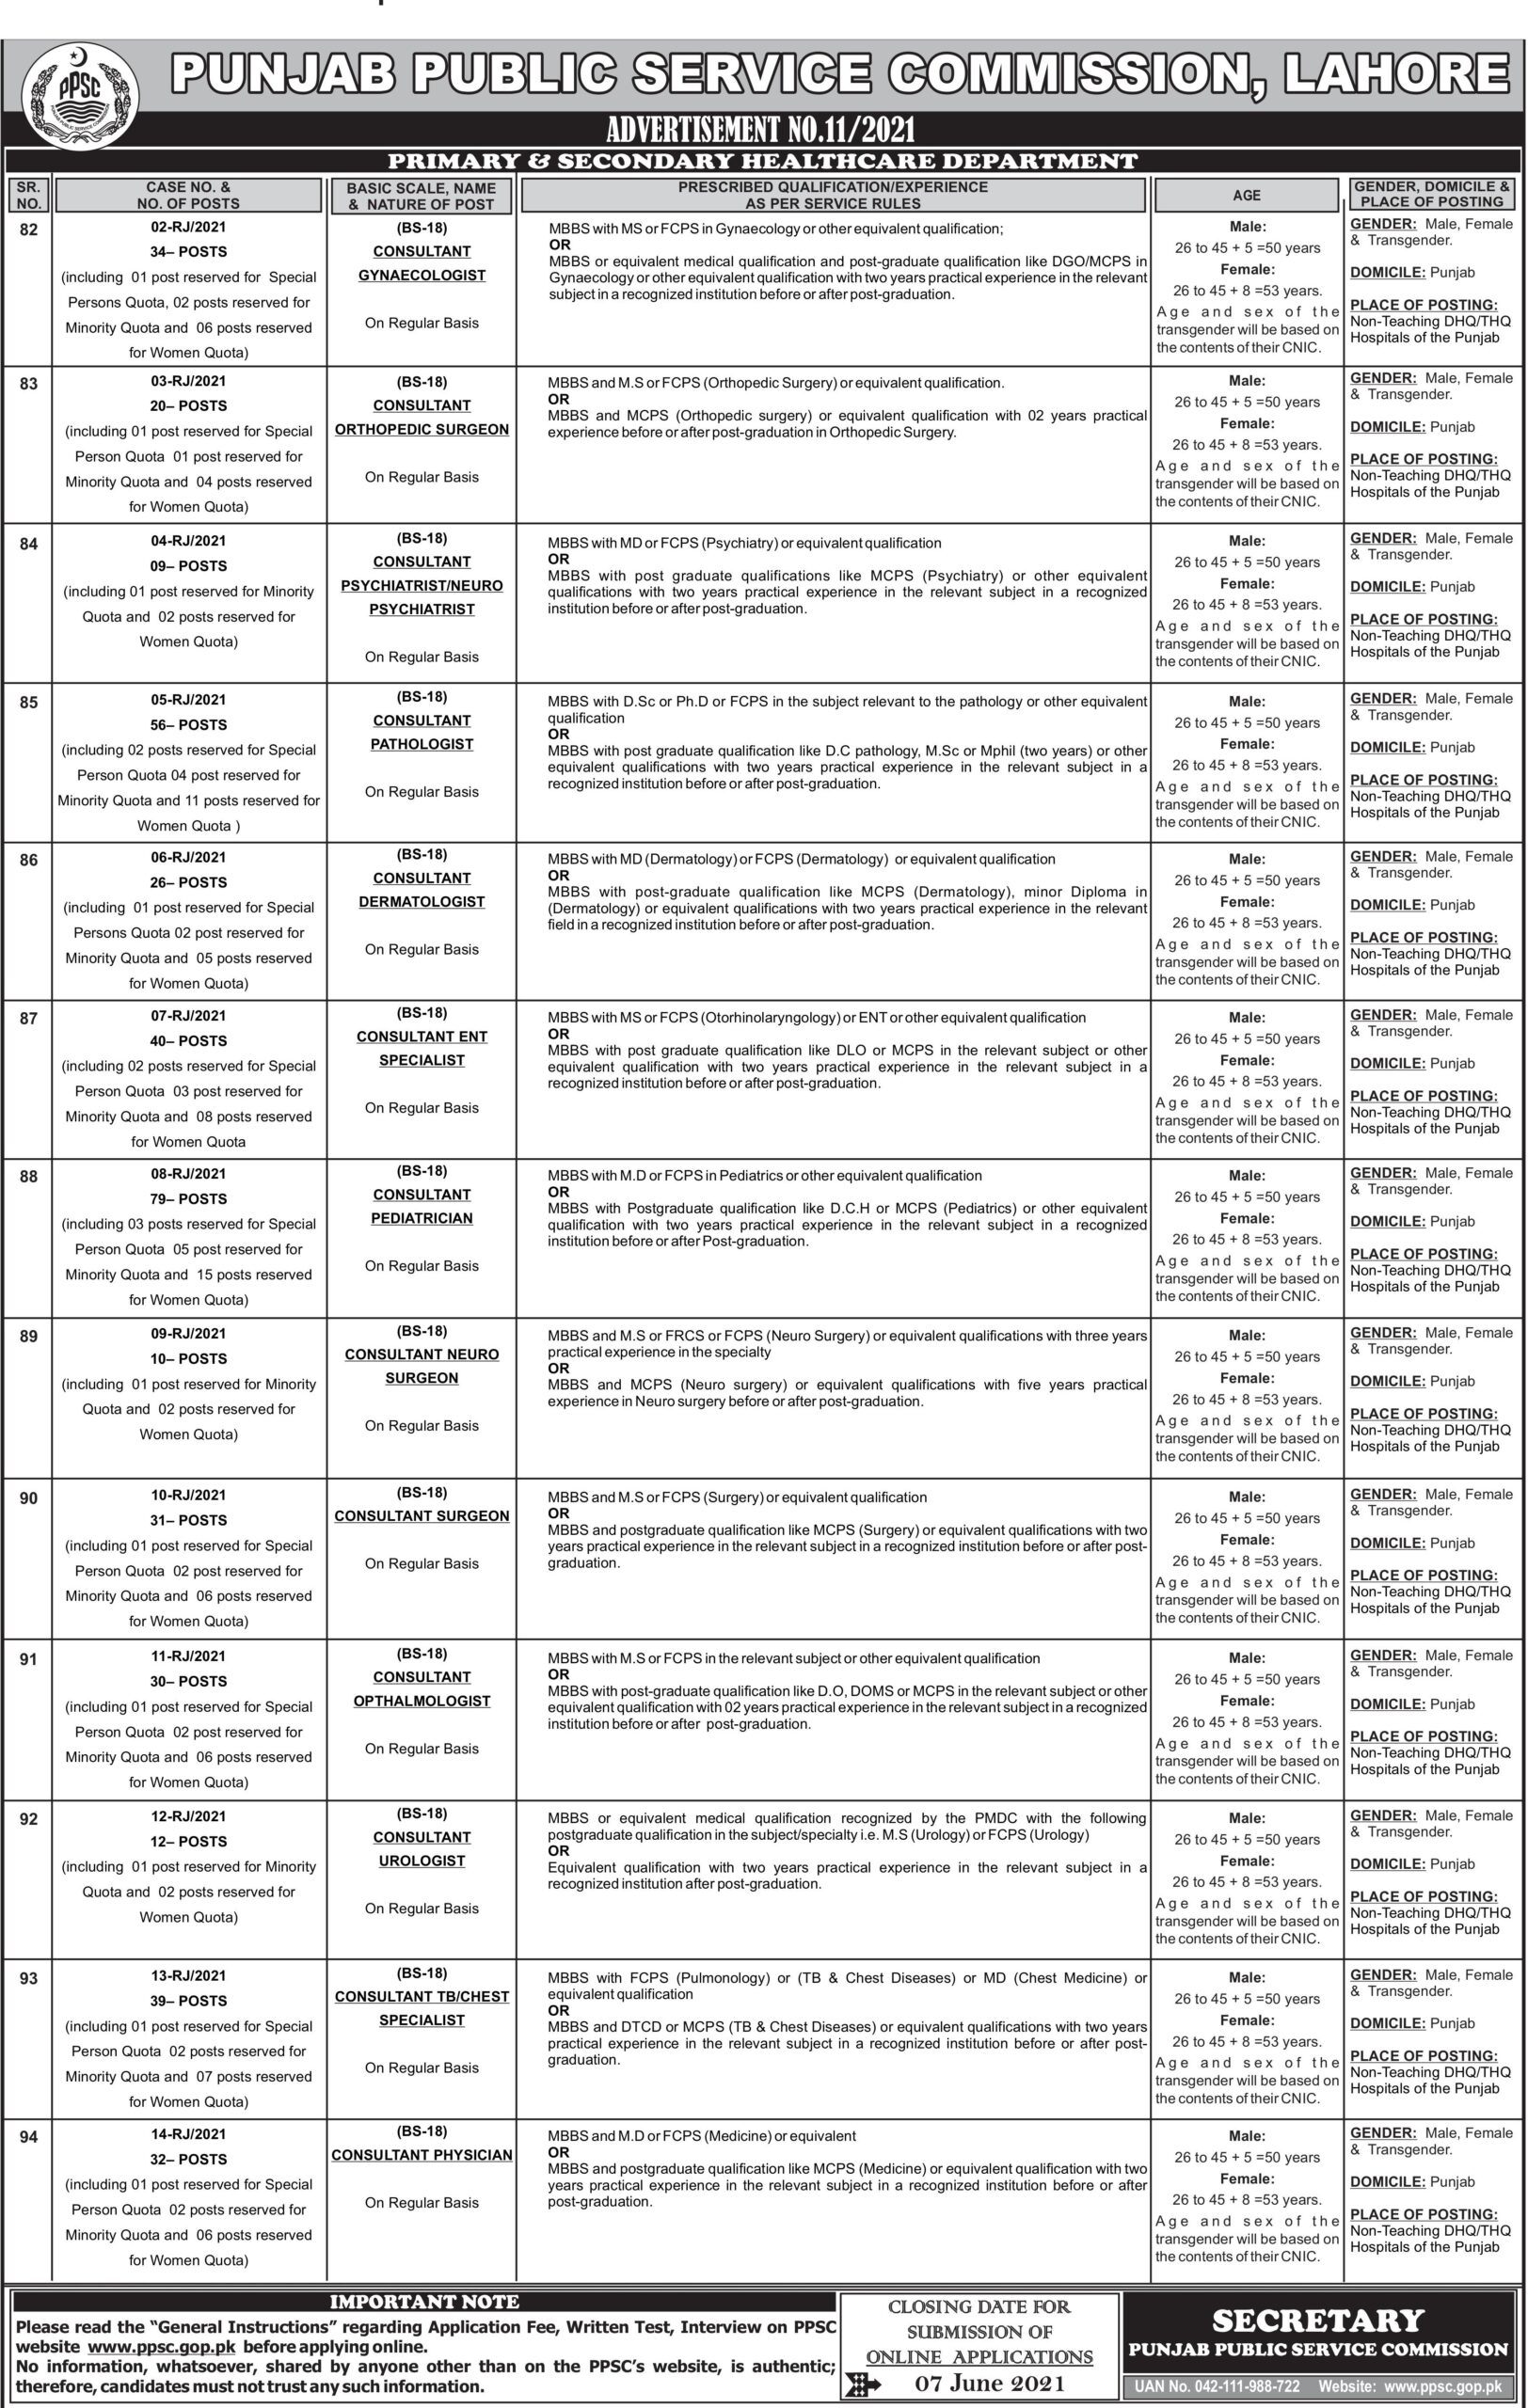 PPSC Jobs in Punjab 2021 May Advertisement